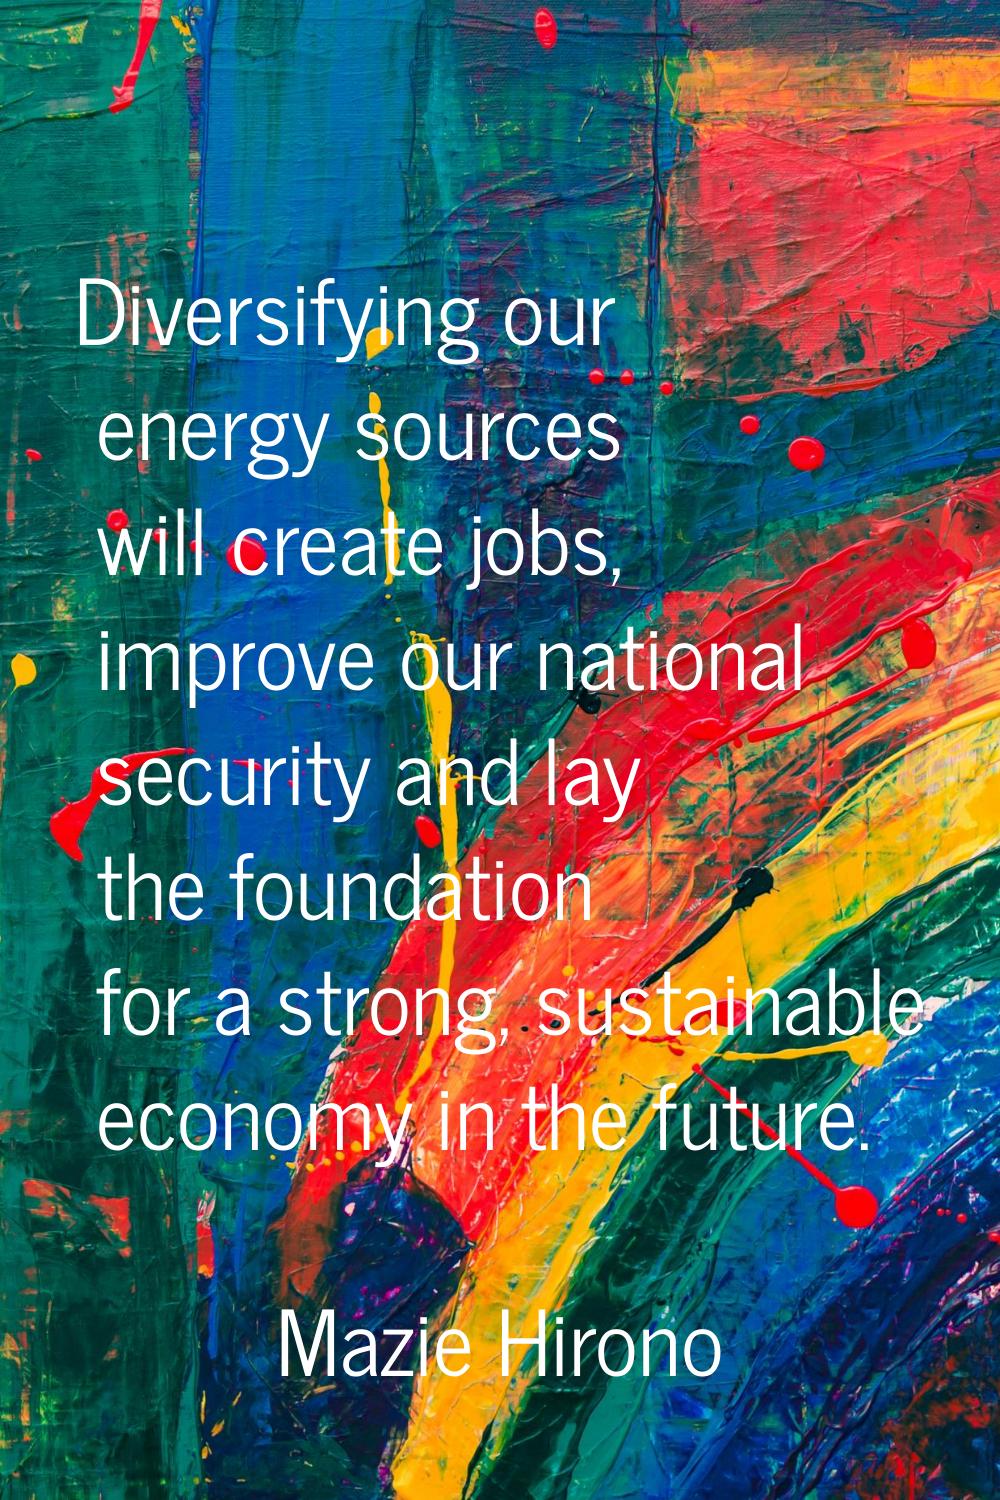 Diversifying our energy sources will create jobs, improve our national security and lay the foundat